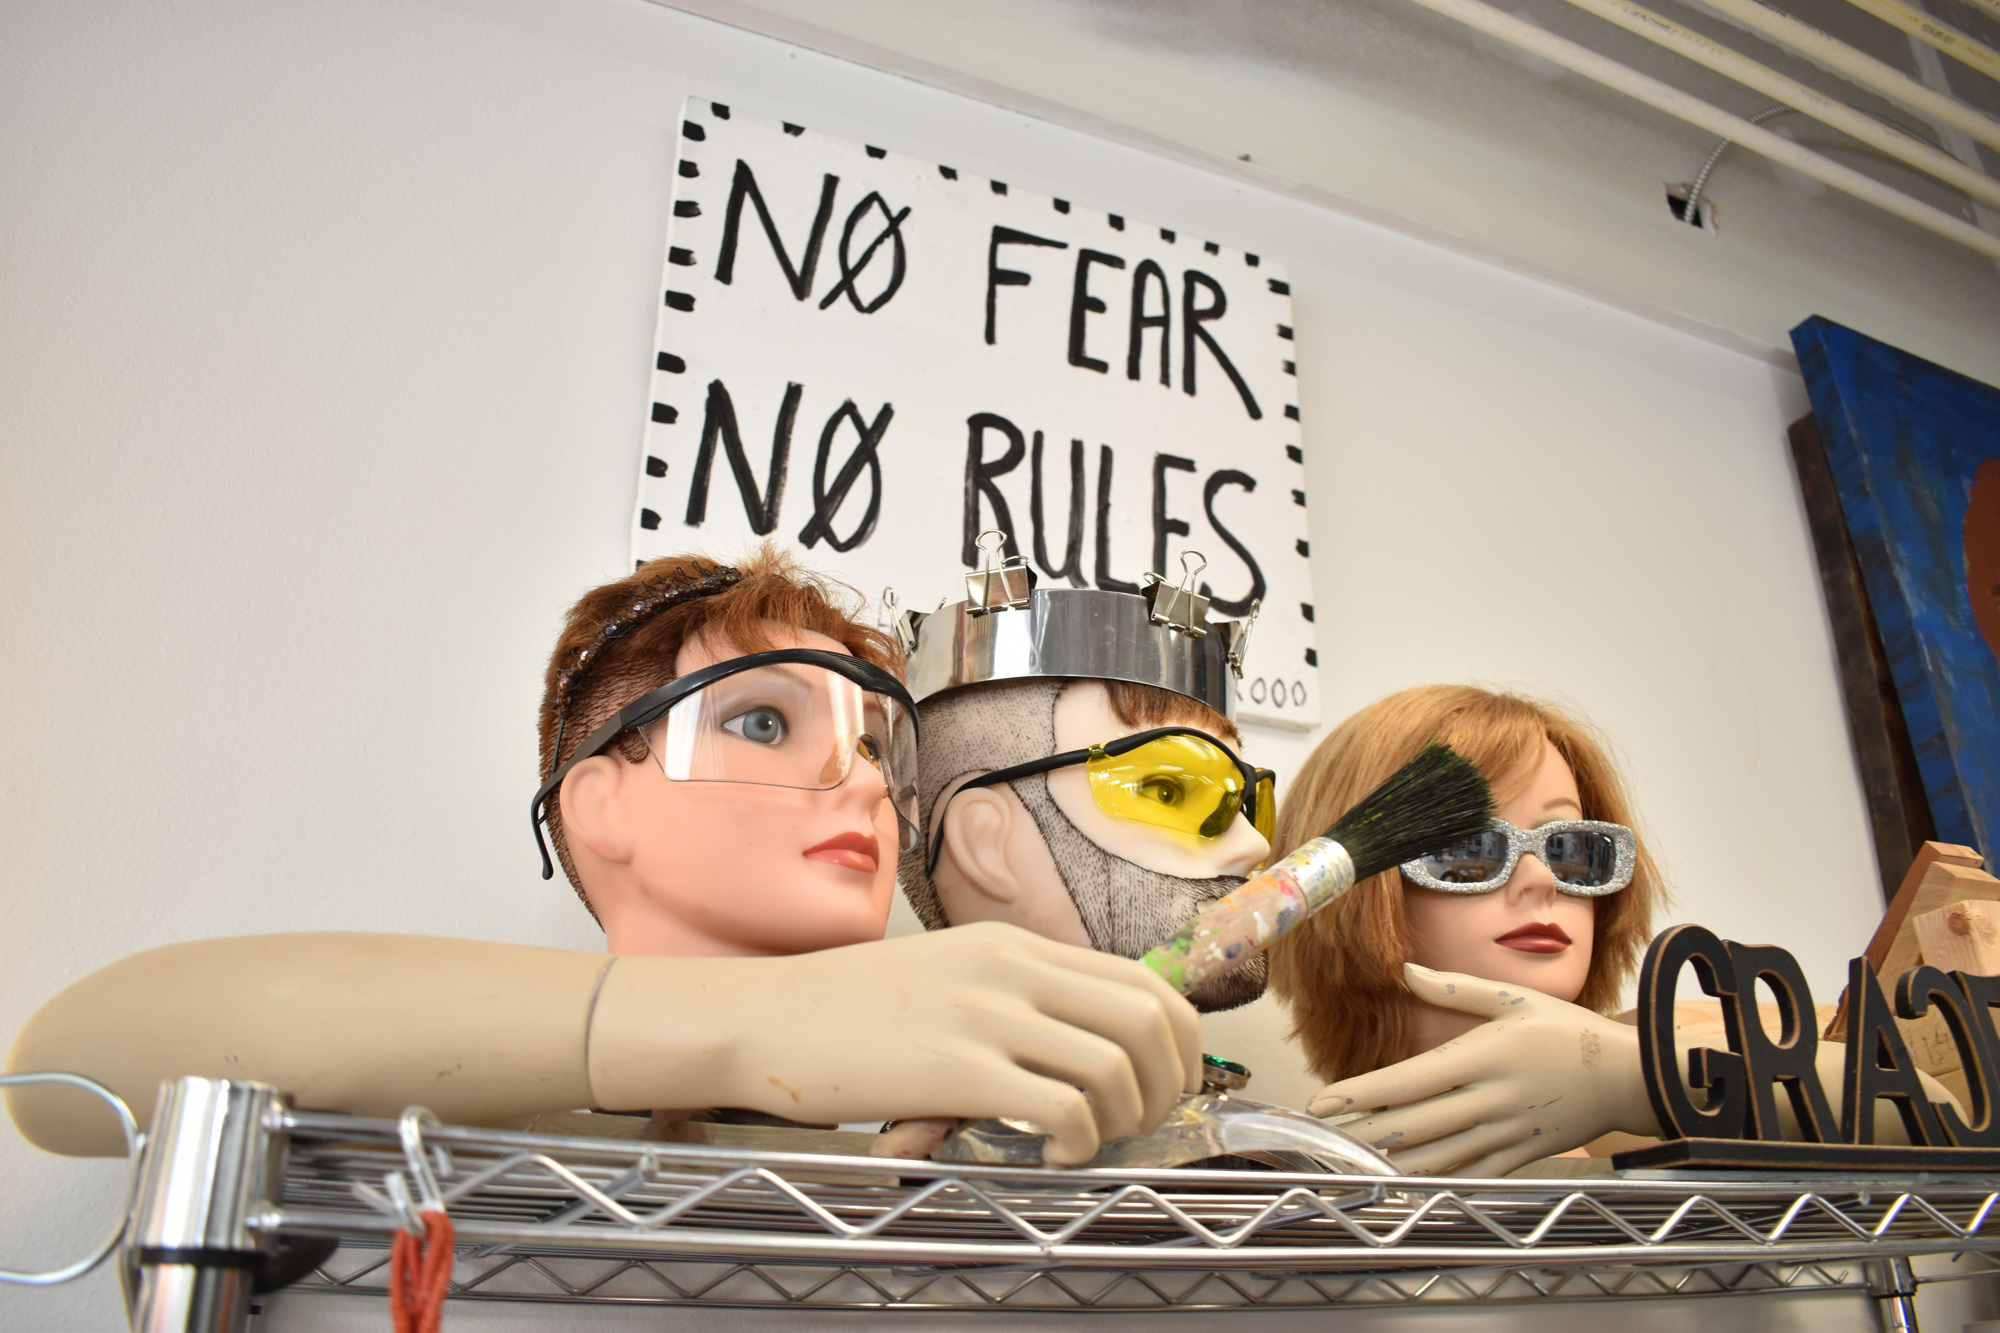 Grace Howl's mantra hangs on the wall behind her mannequin head collection. Photo by Niki Kottmann